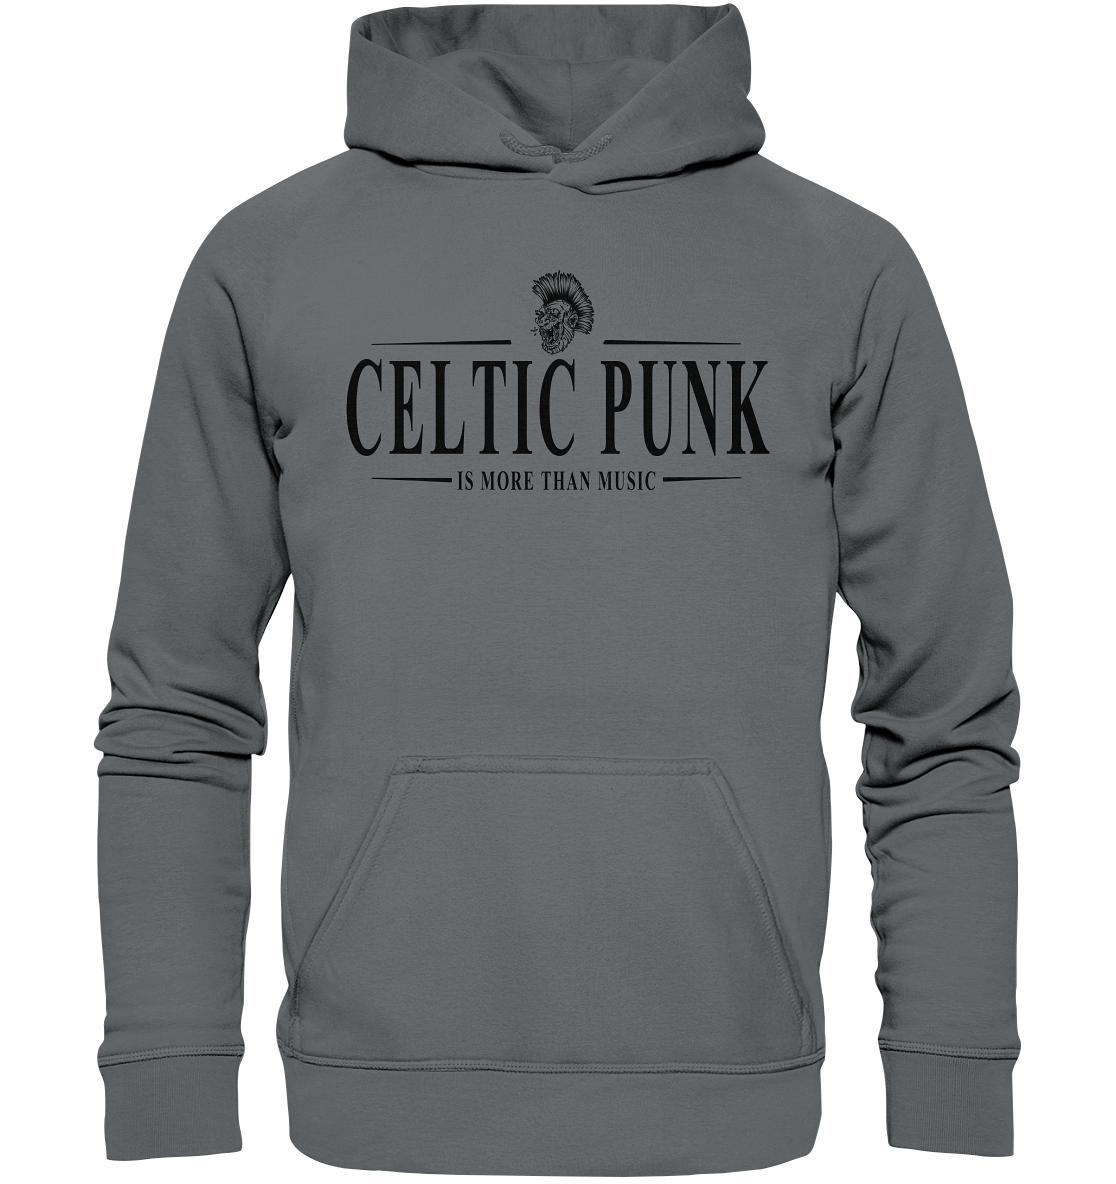 Celtic Punk "Is More Than Music" - Basic Unisex Hoodie